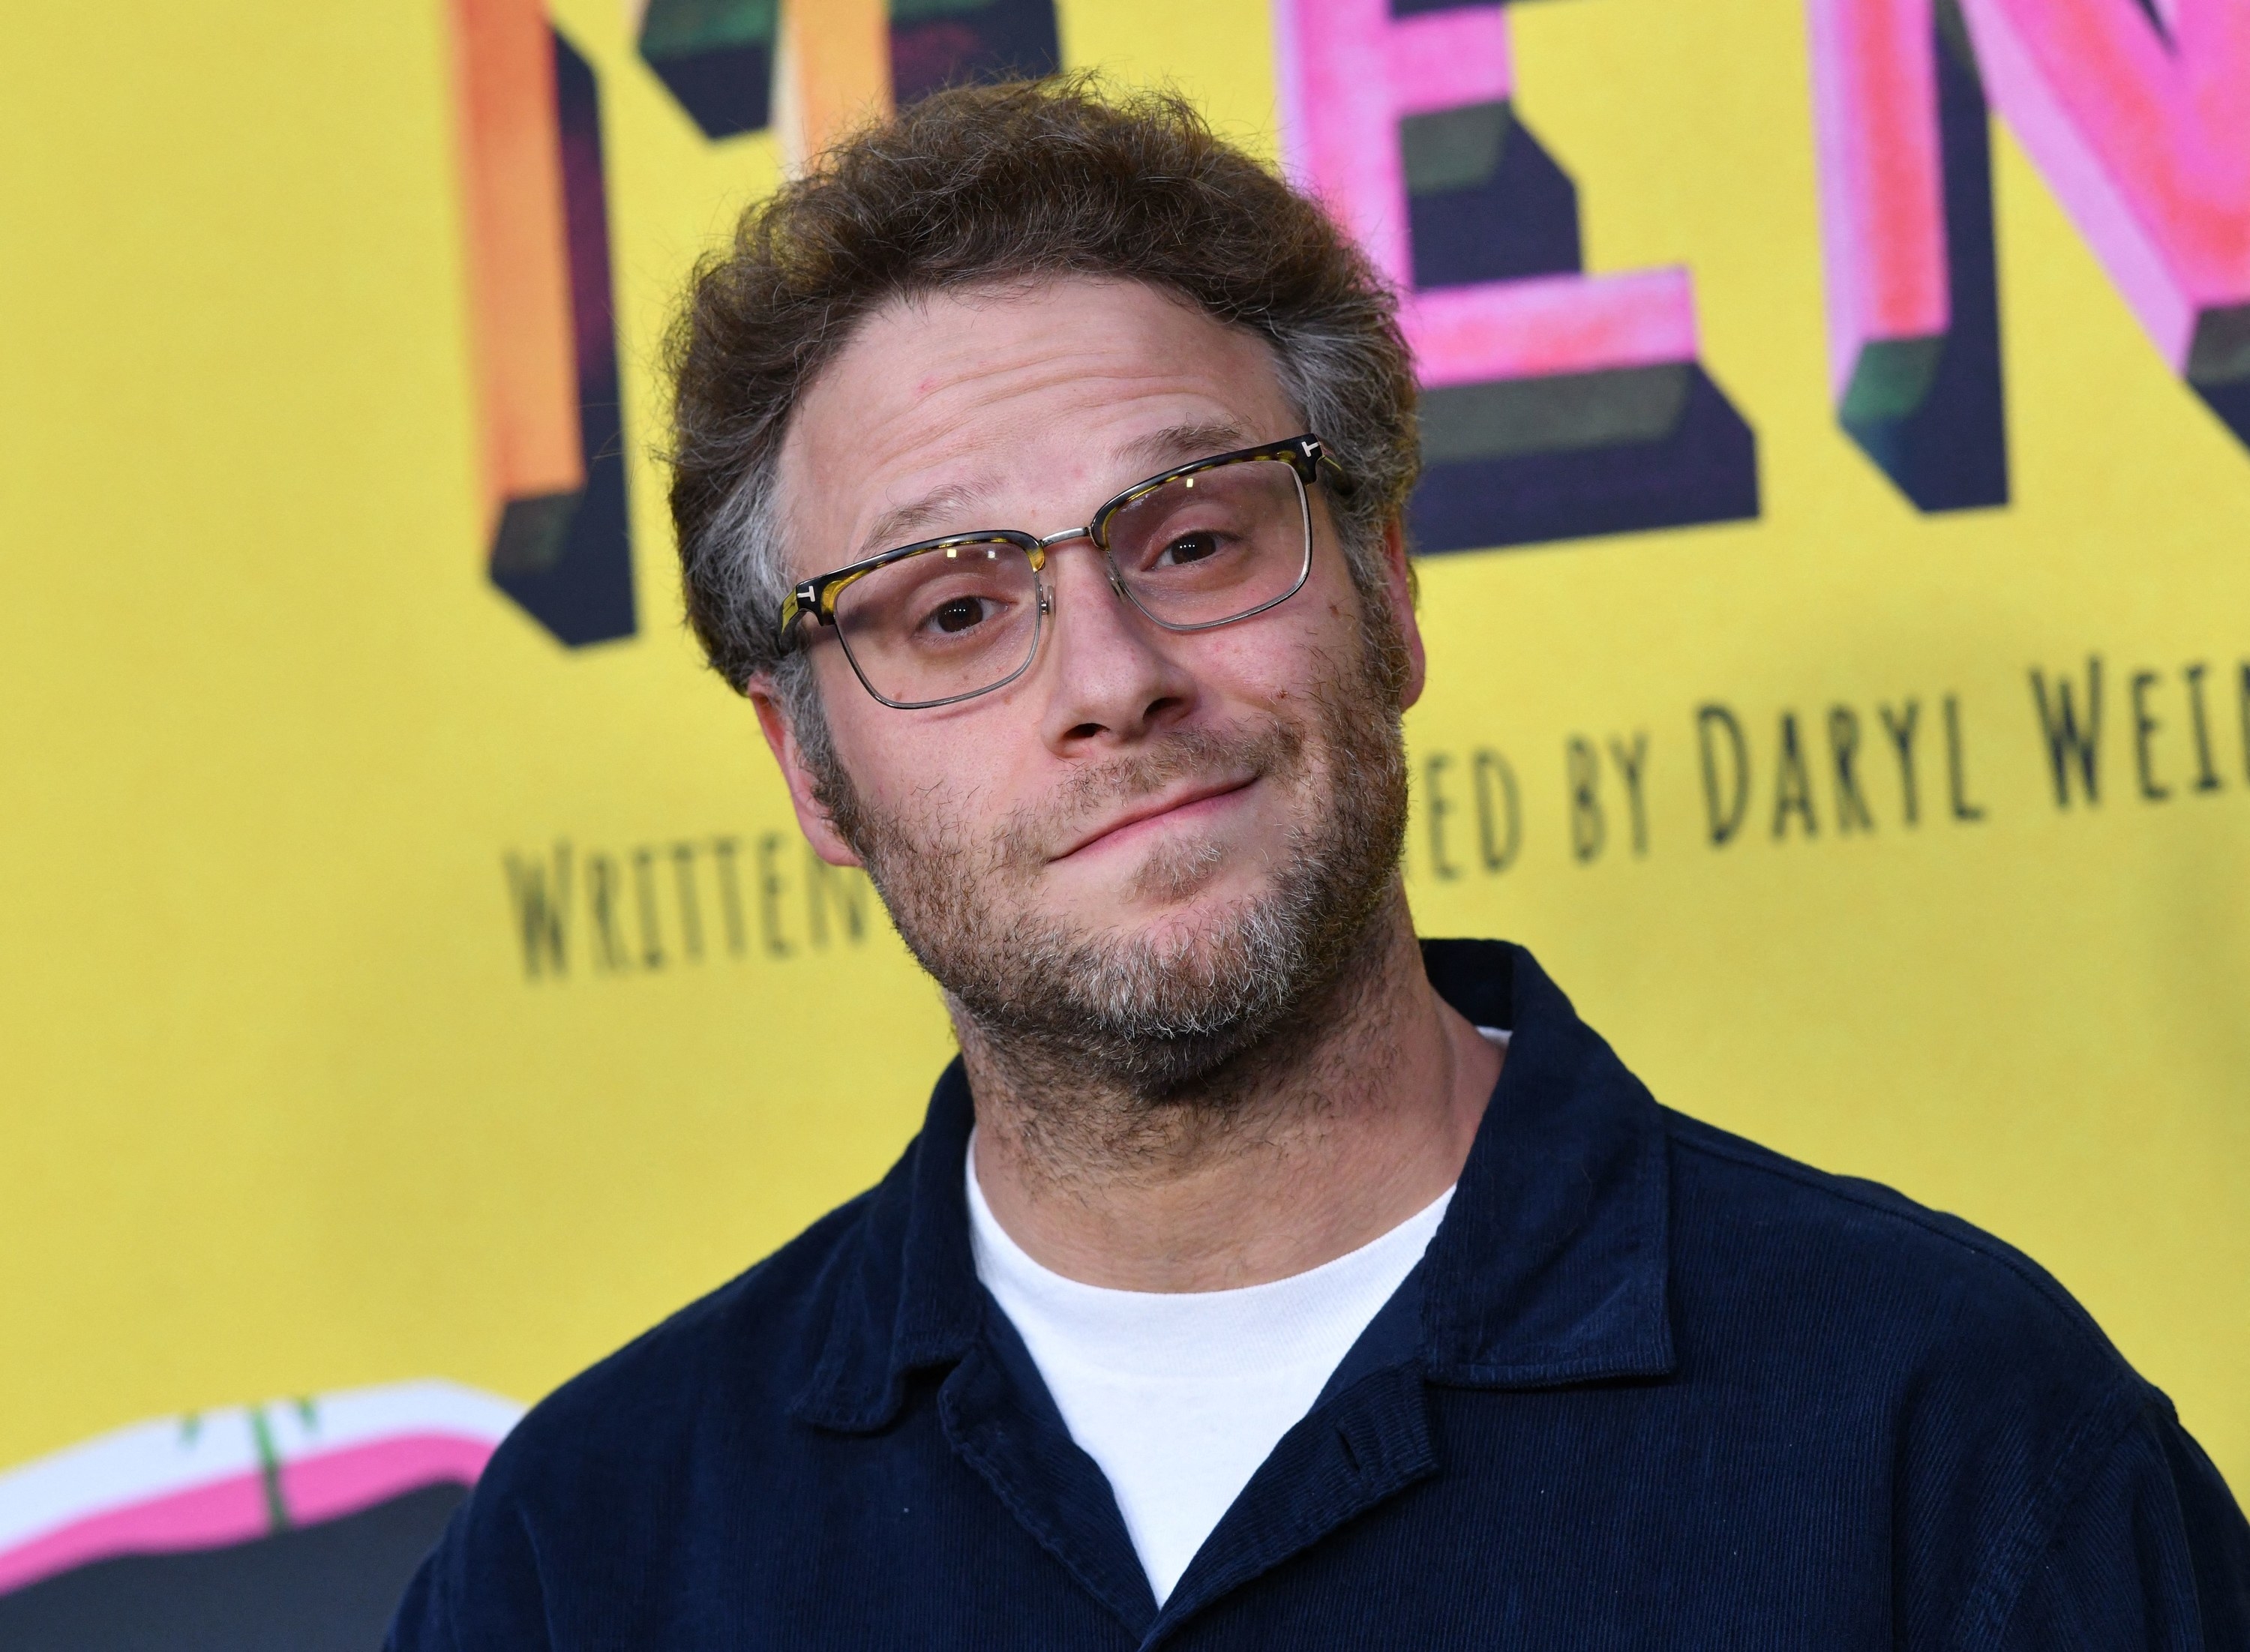 Rogen cocks his head to the side while smiling for a photo